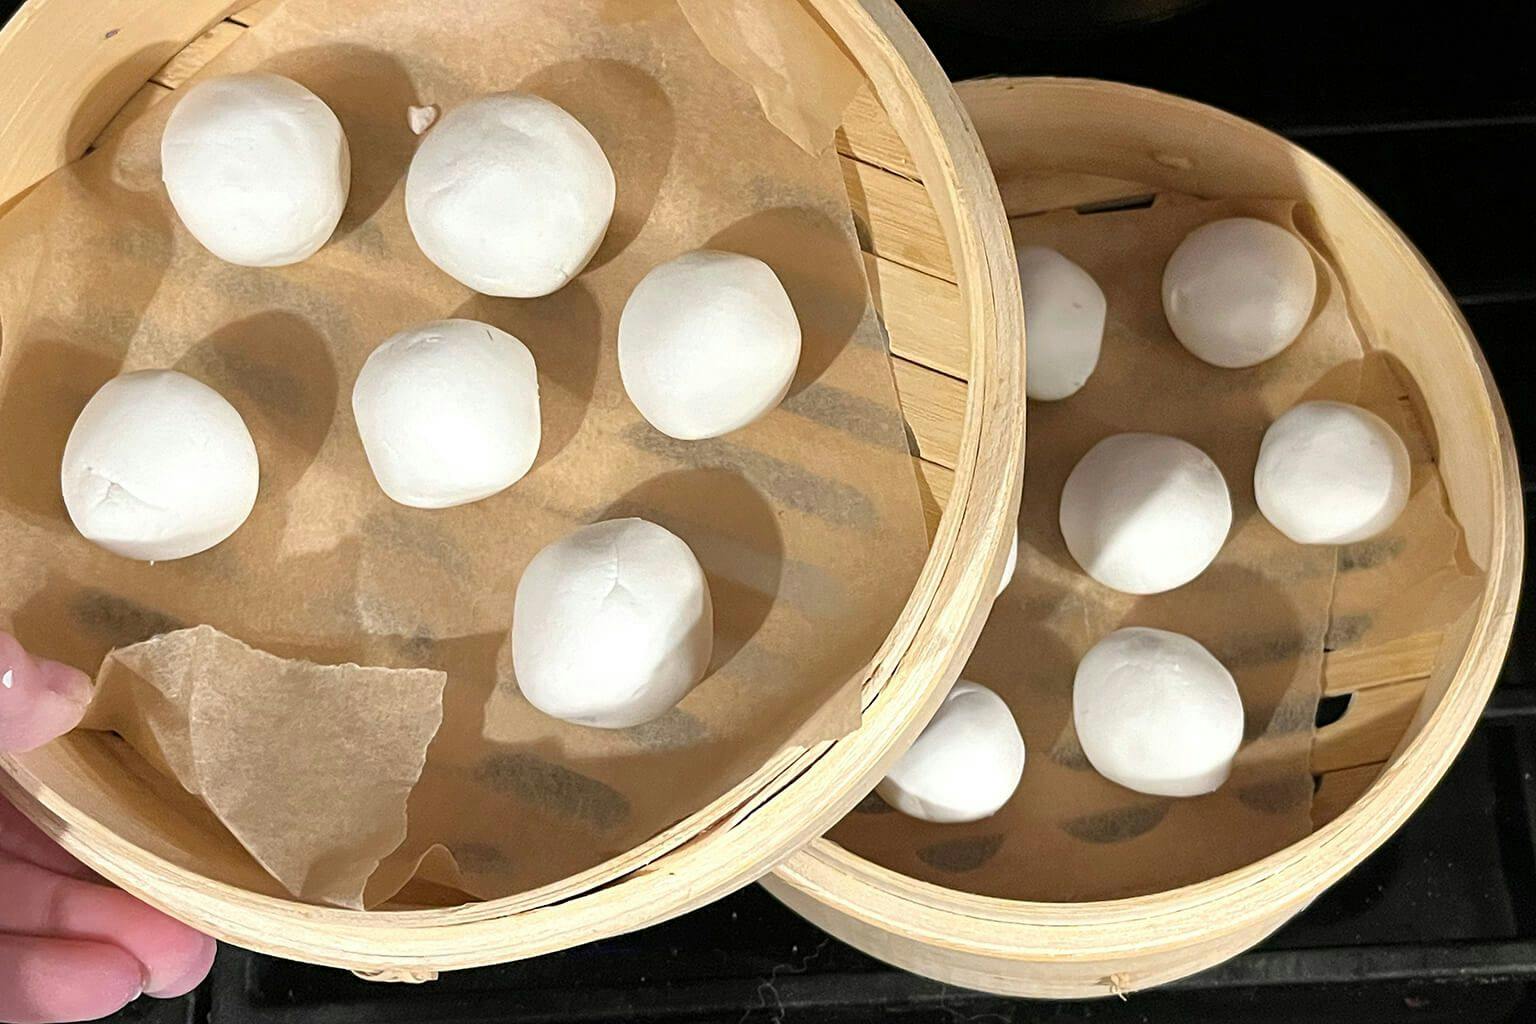 Place dango in the bamboo steamer